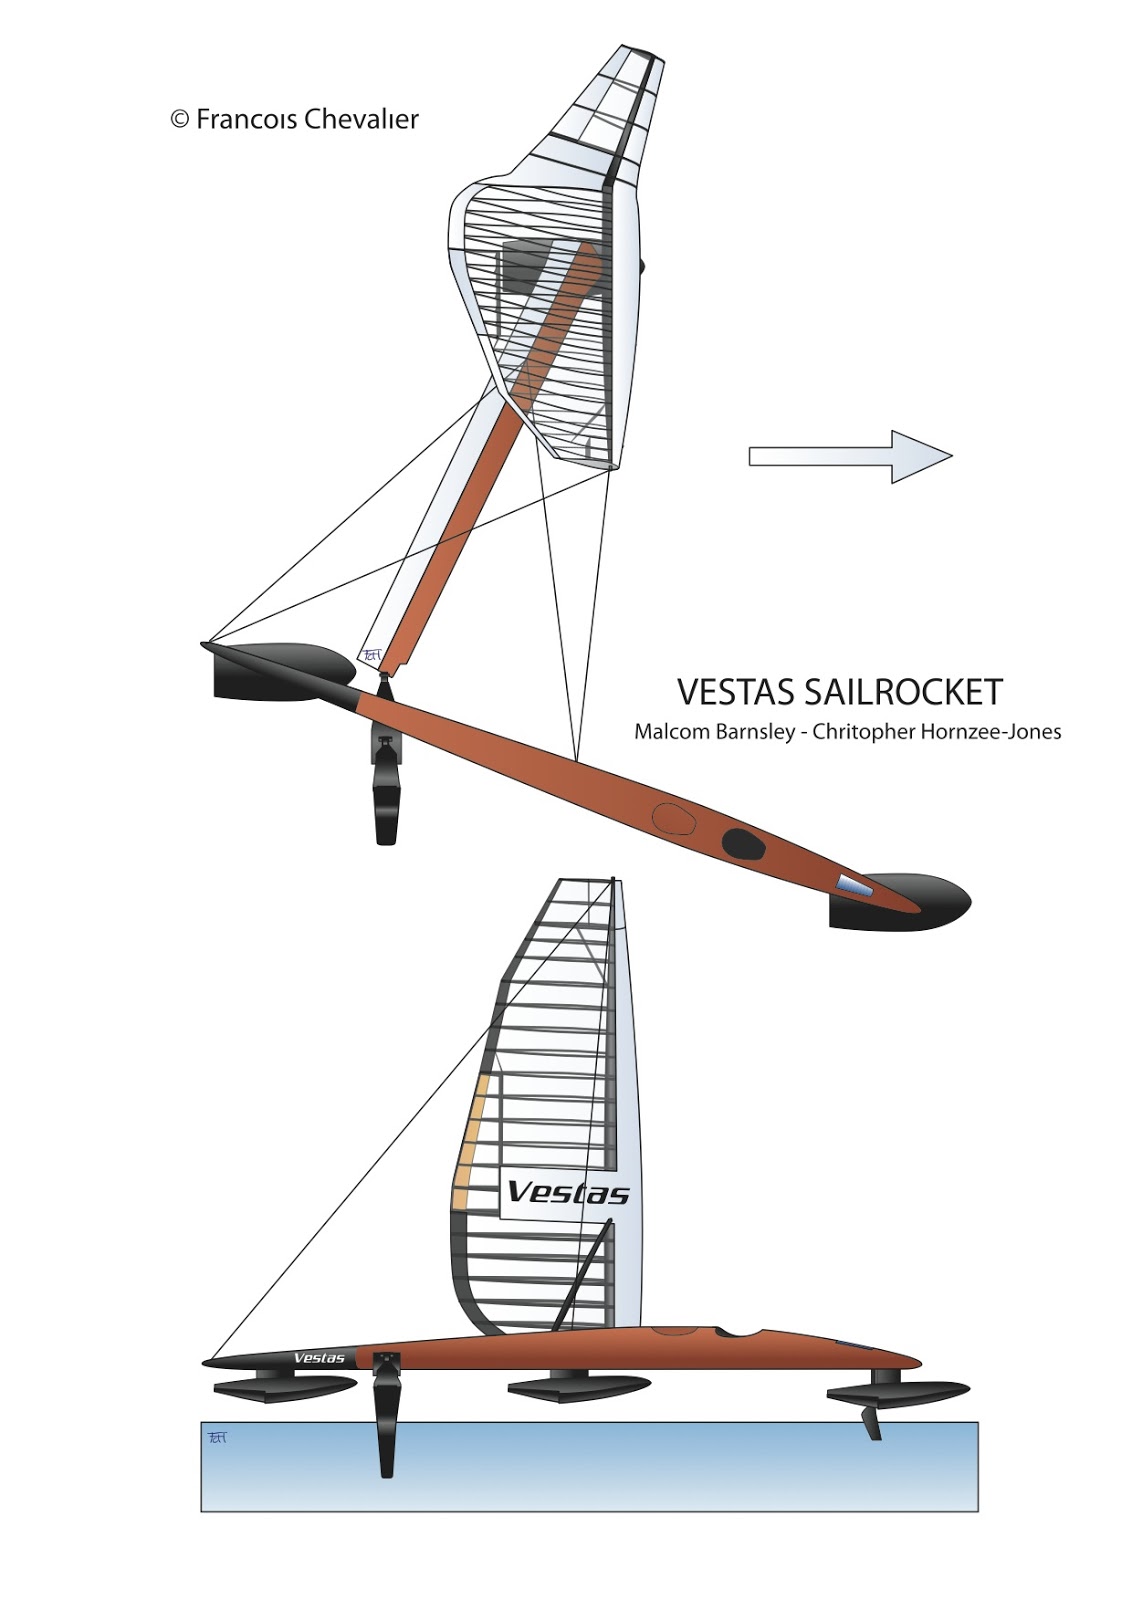 Chevalier Taglang: CLEARING THE 50-KNOT GATE, HYDROFOIL SAILROCKET 